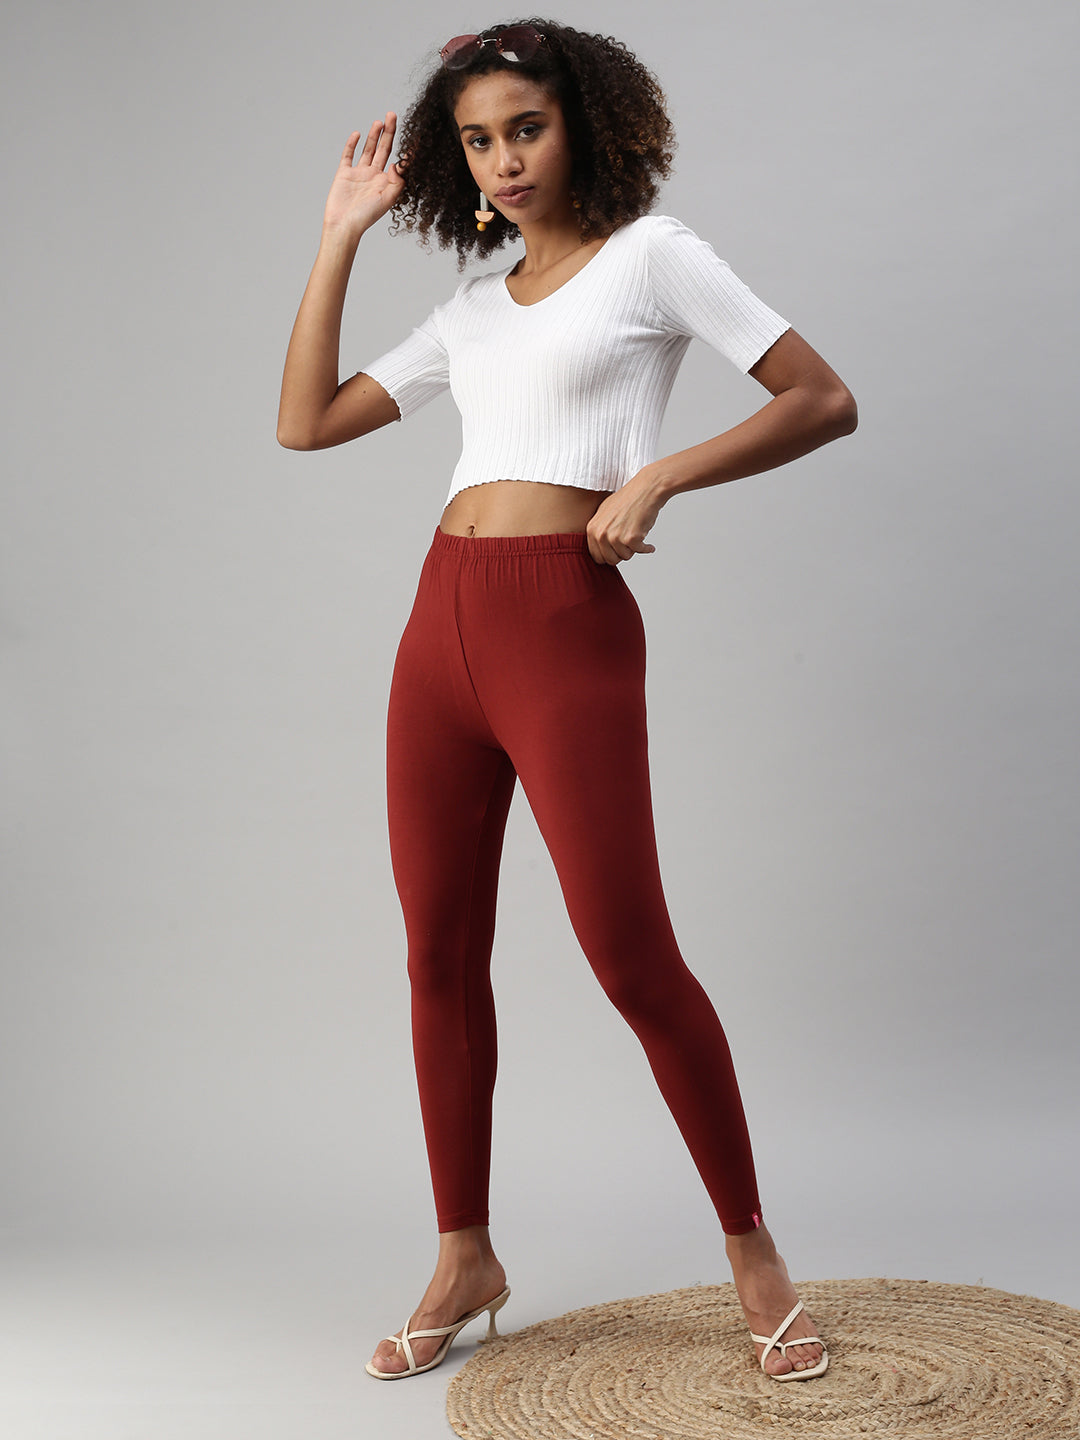 Forever 21 Leggings & Churidars for Women sale - discounted price |  FASHIOLA INDIA